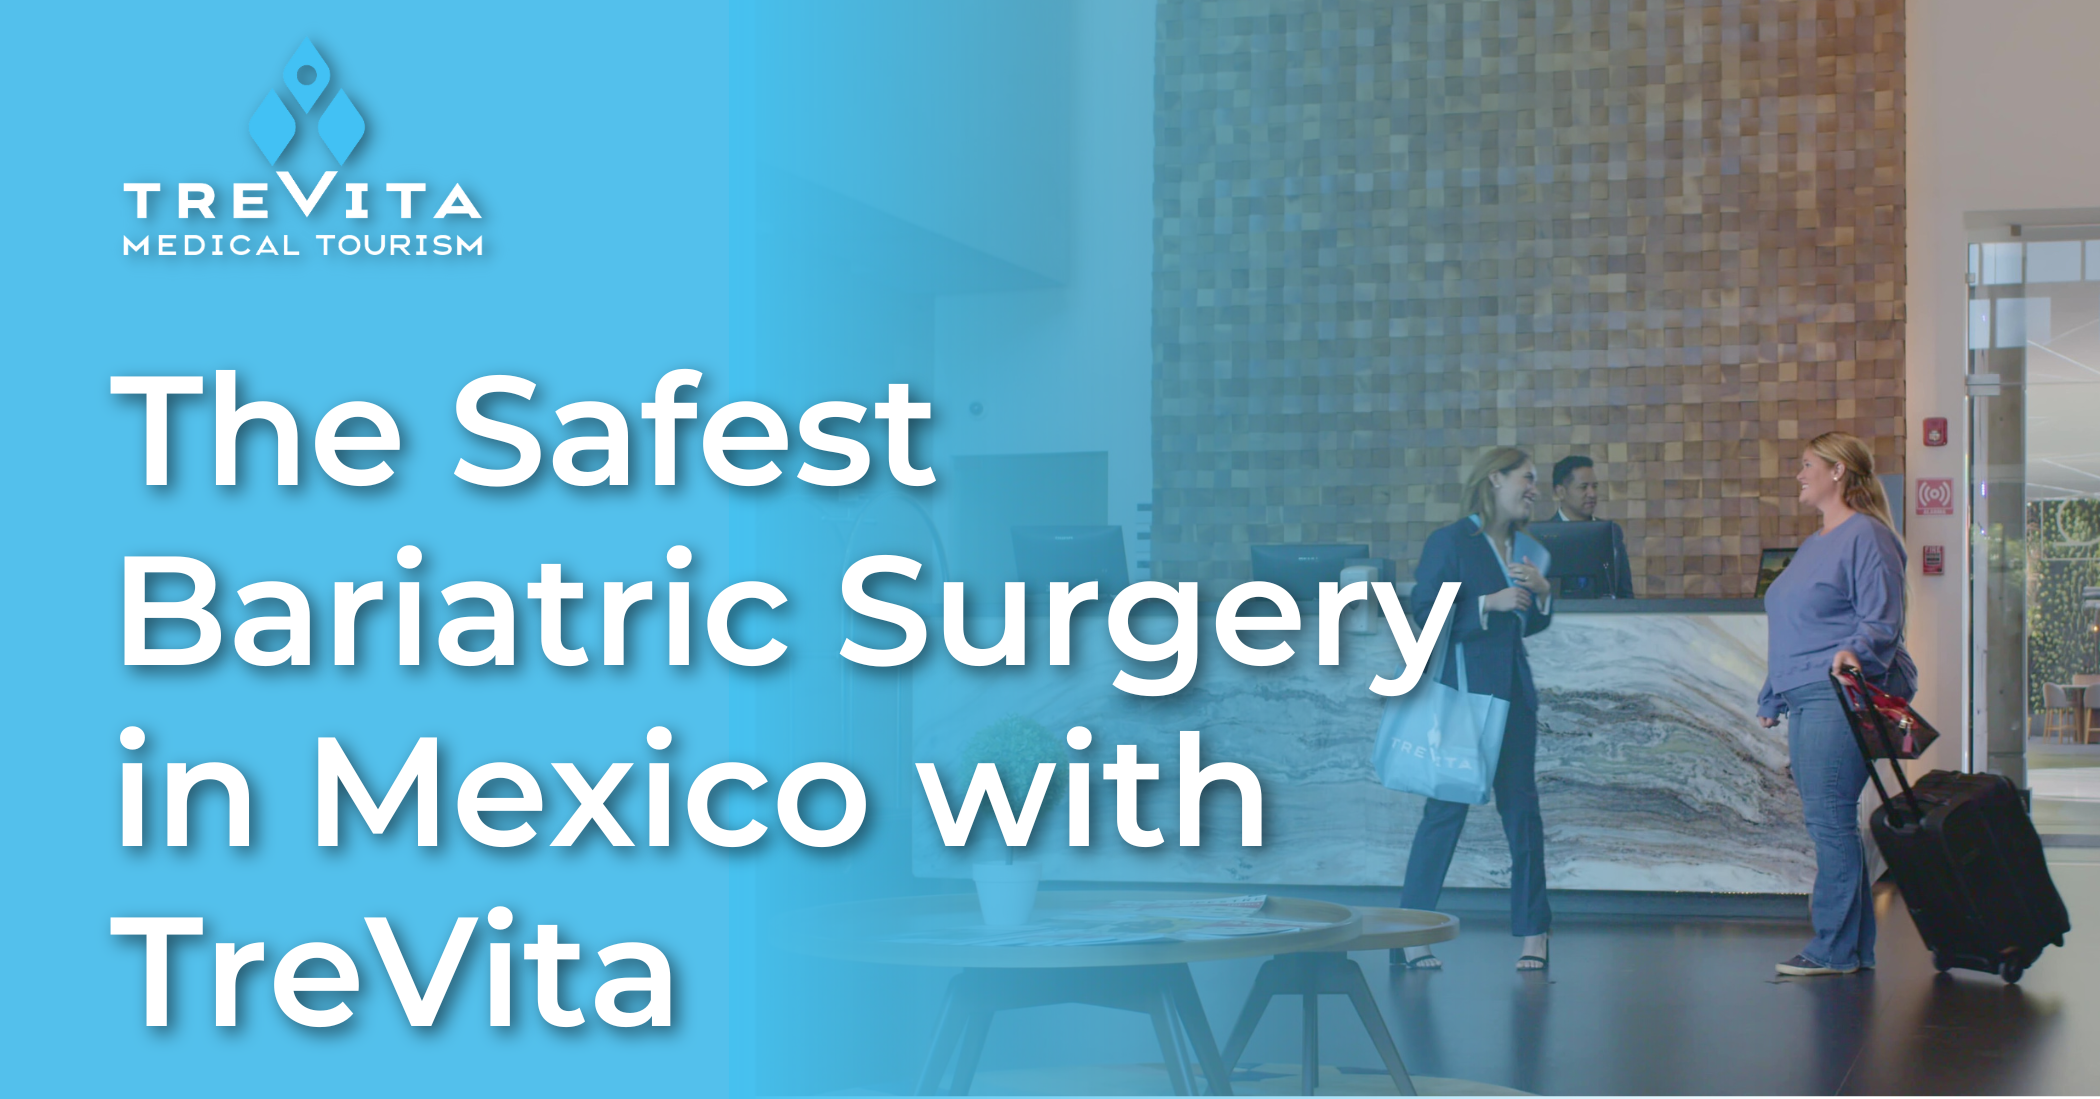 The Safest Bariatric Surgery in Mexico with TreVita